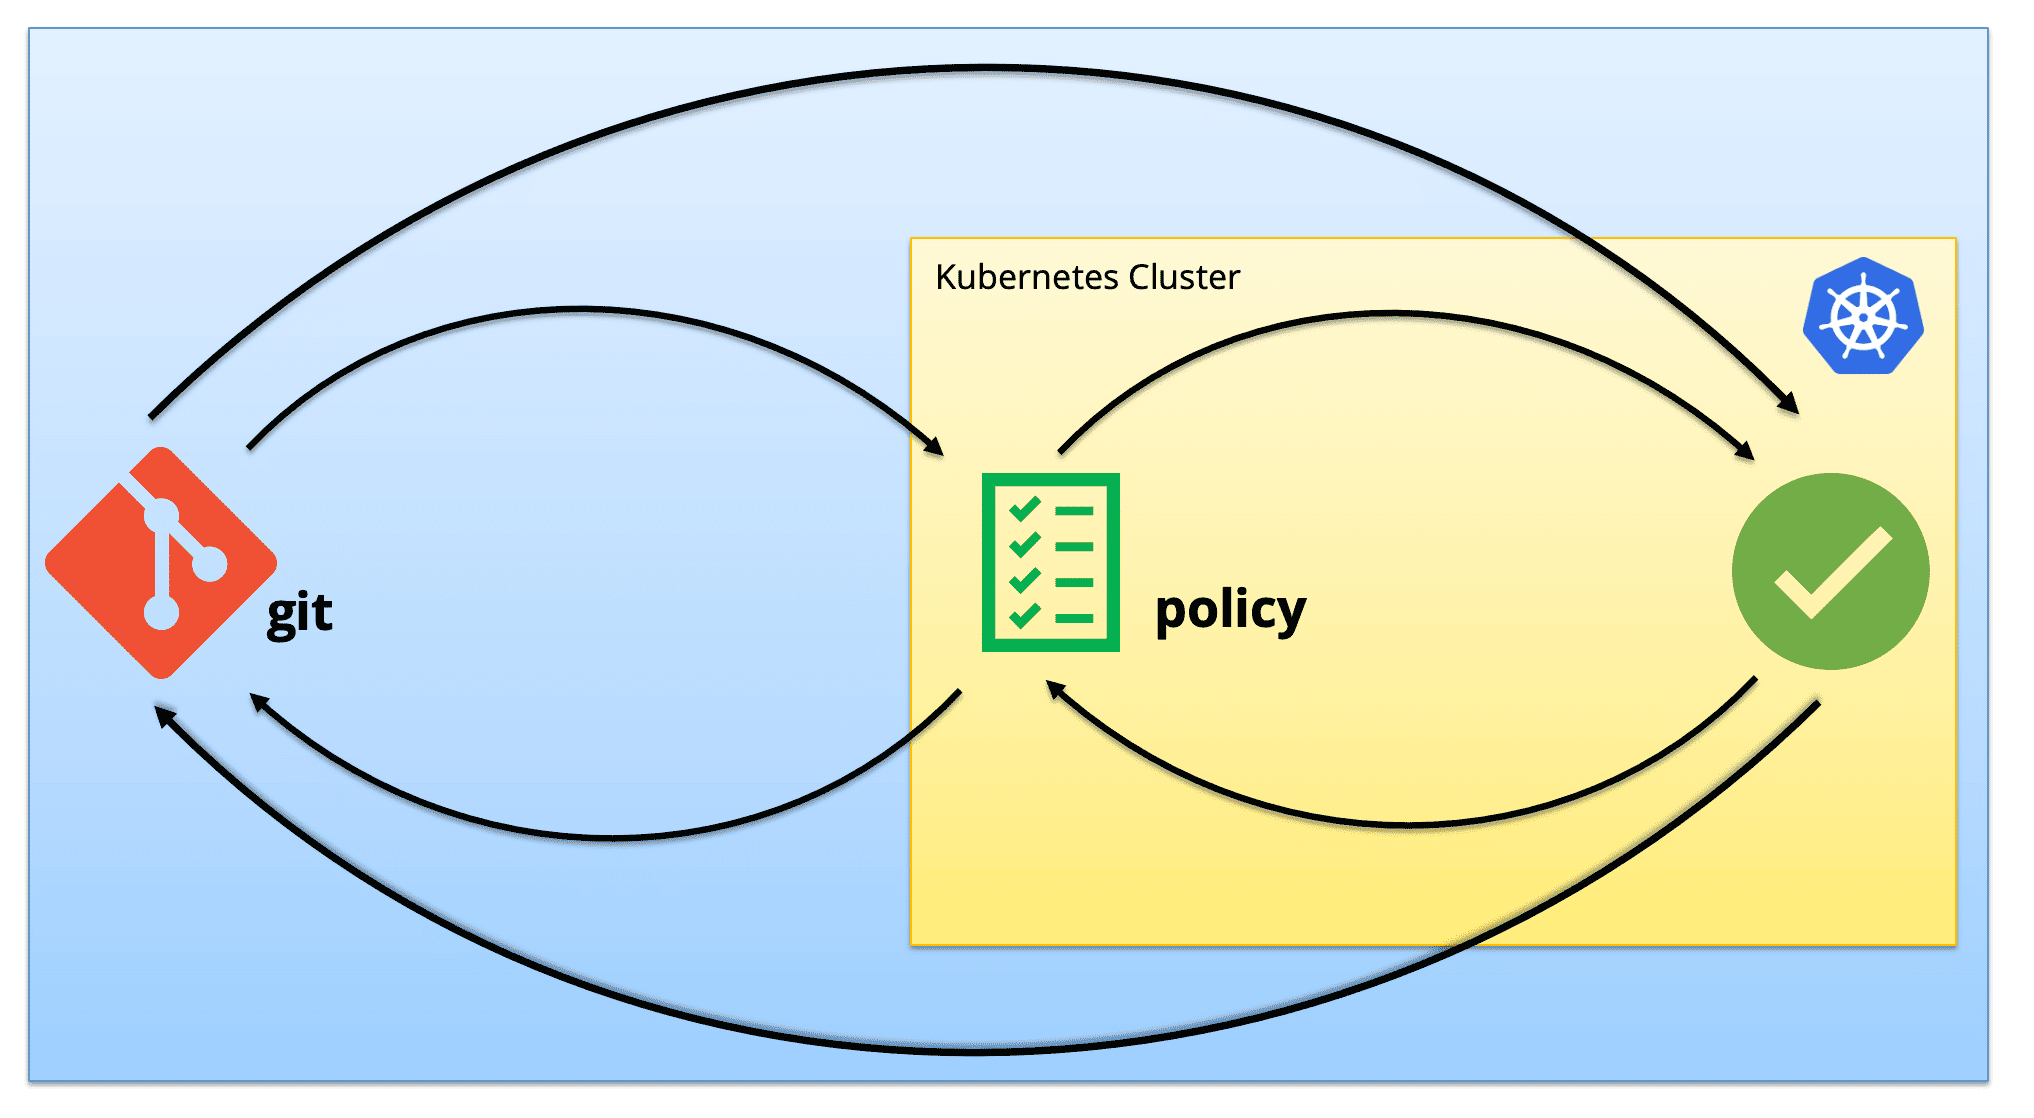 Diagram showing process flow of git and Kubernetes Cluster (policy)